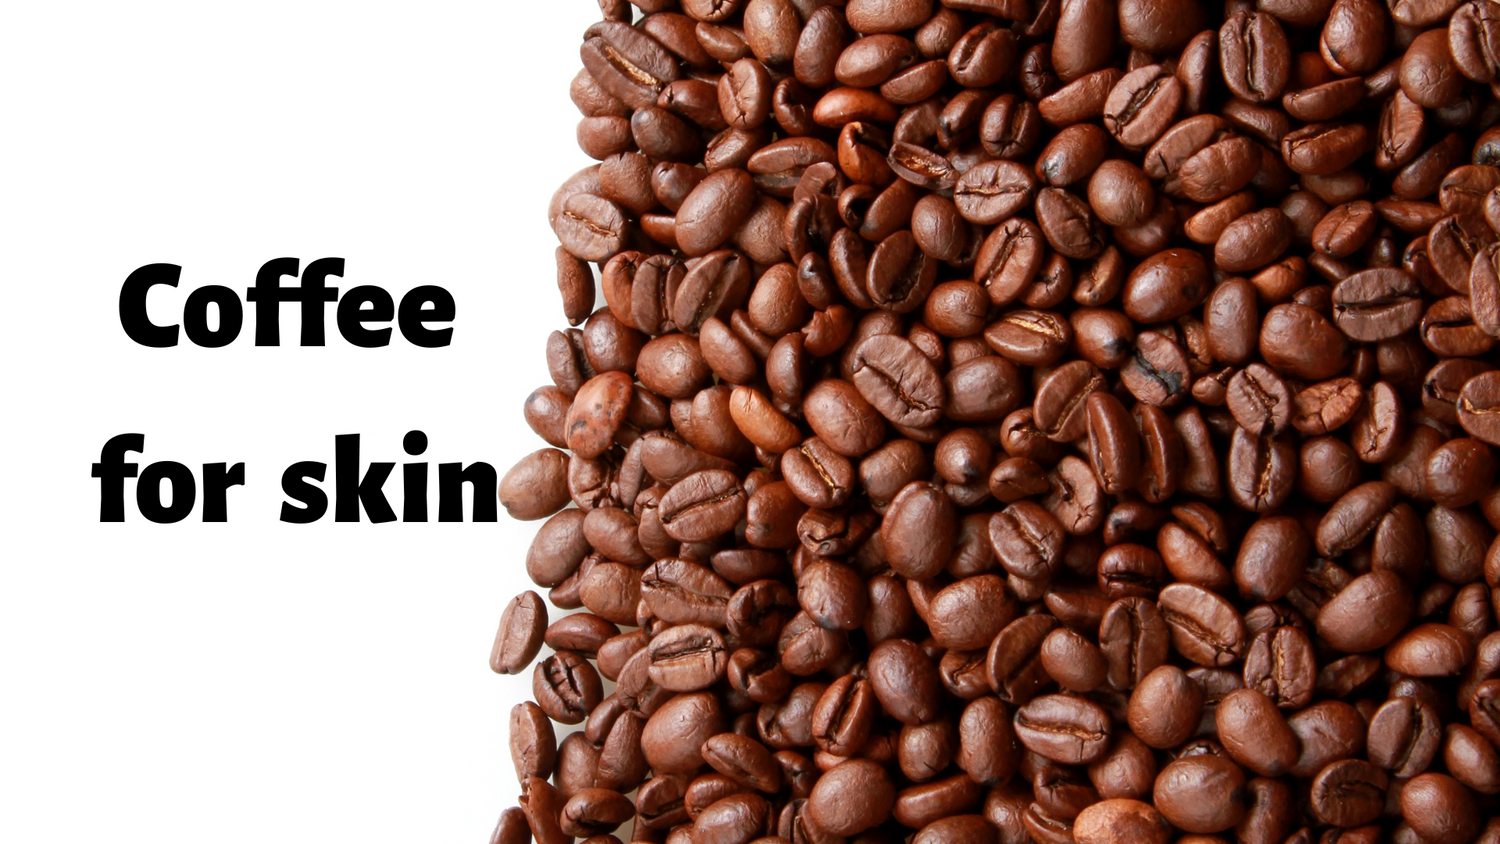 Indulging In the Coffee Benefits for Skin